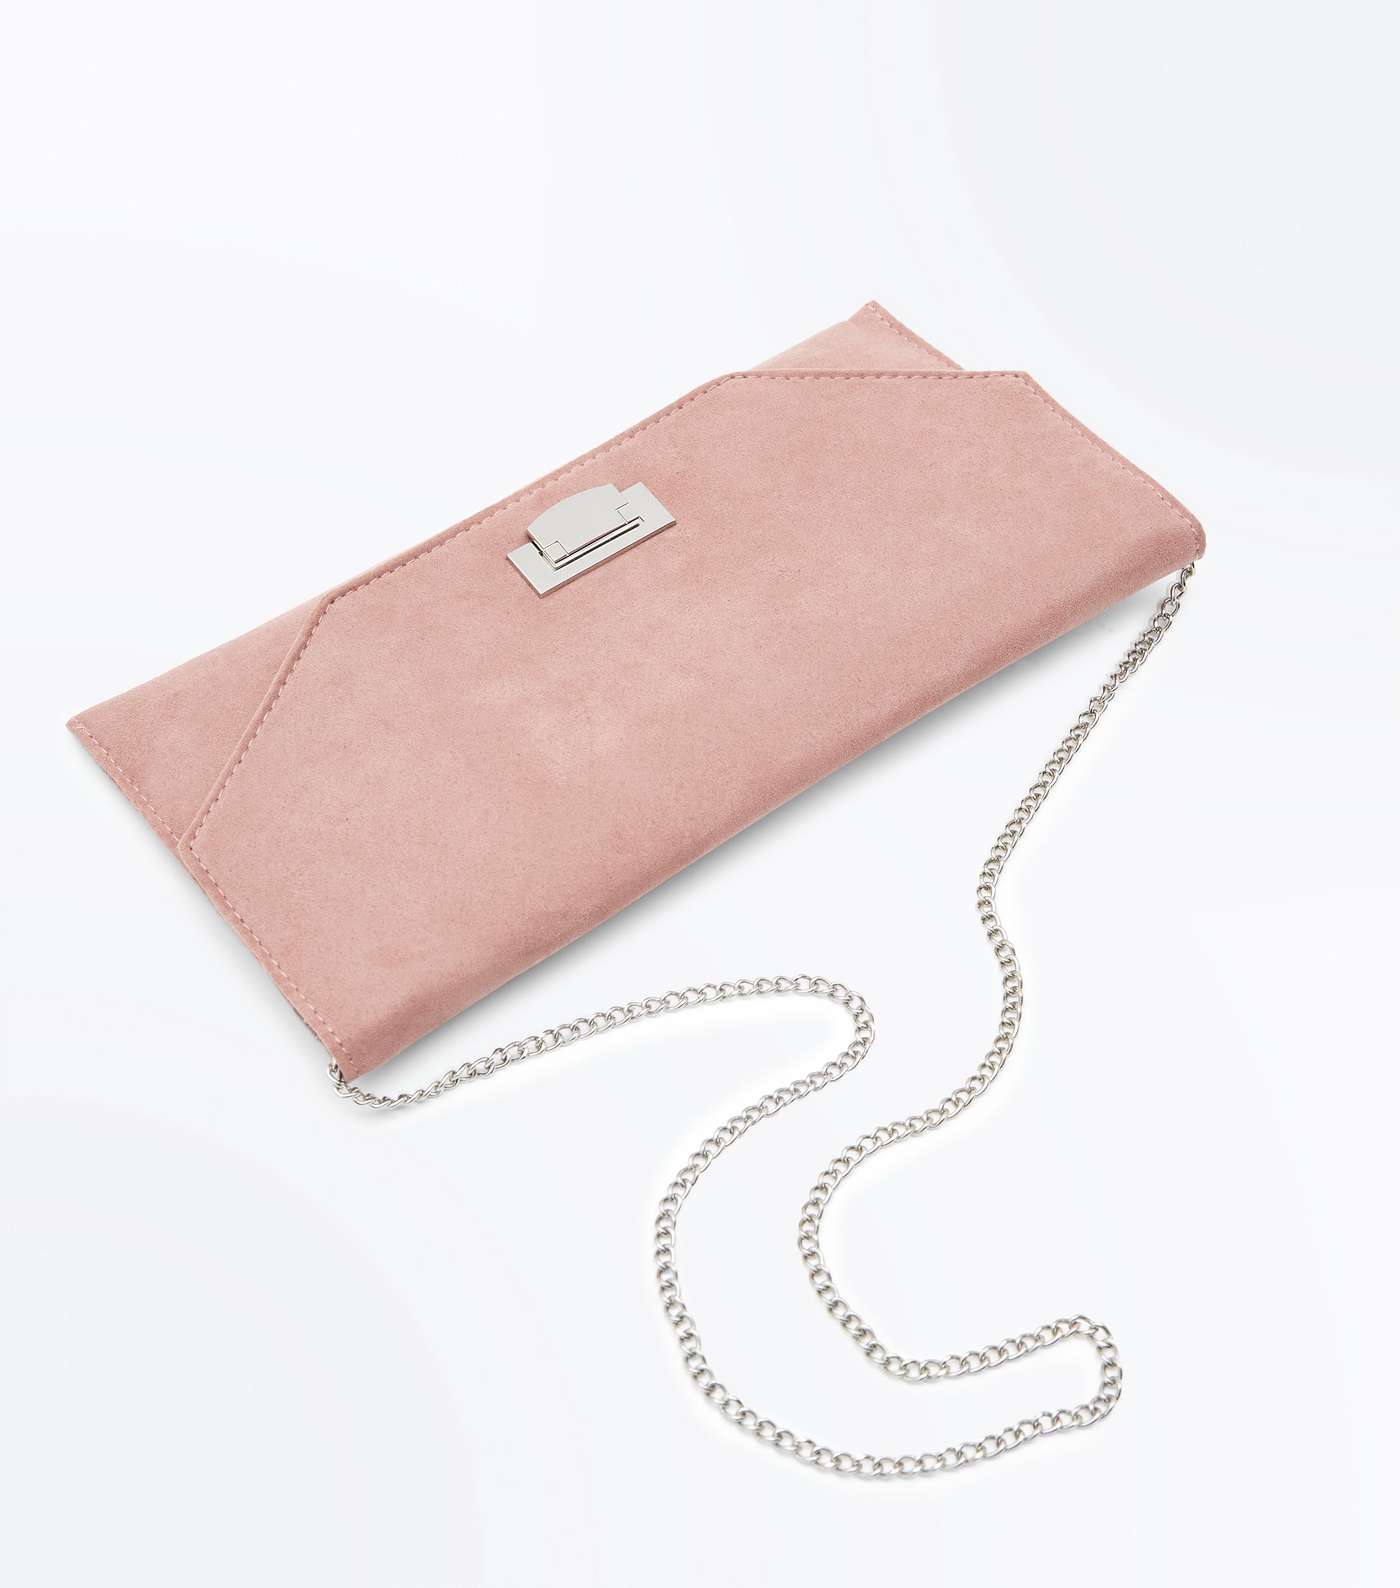 Nude Chain Strap Envelope Clutch Bag Image 4